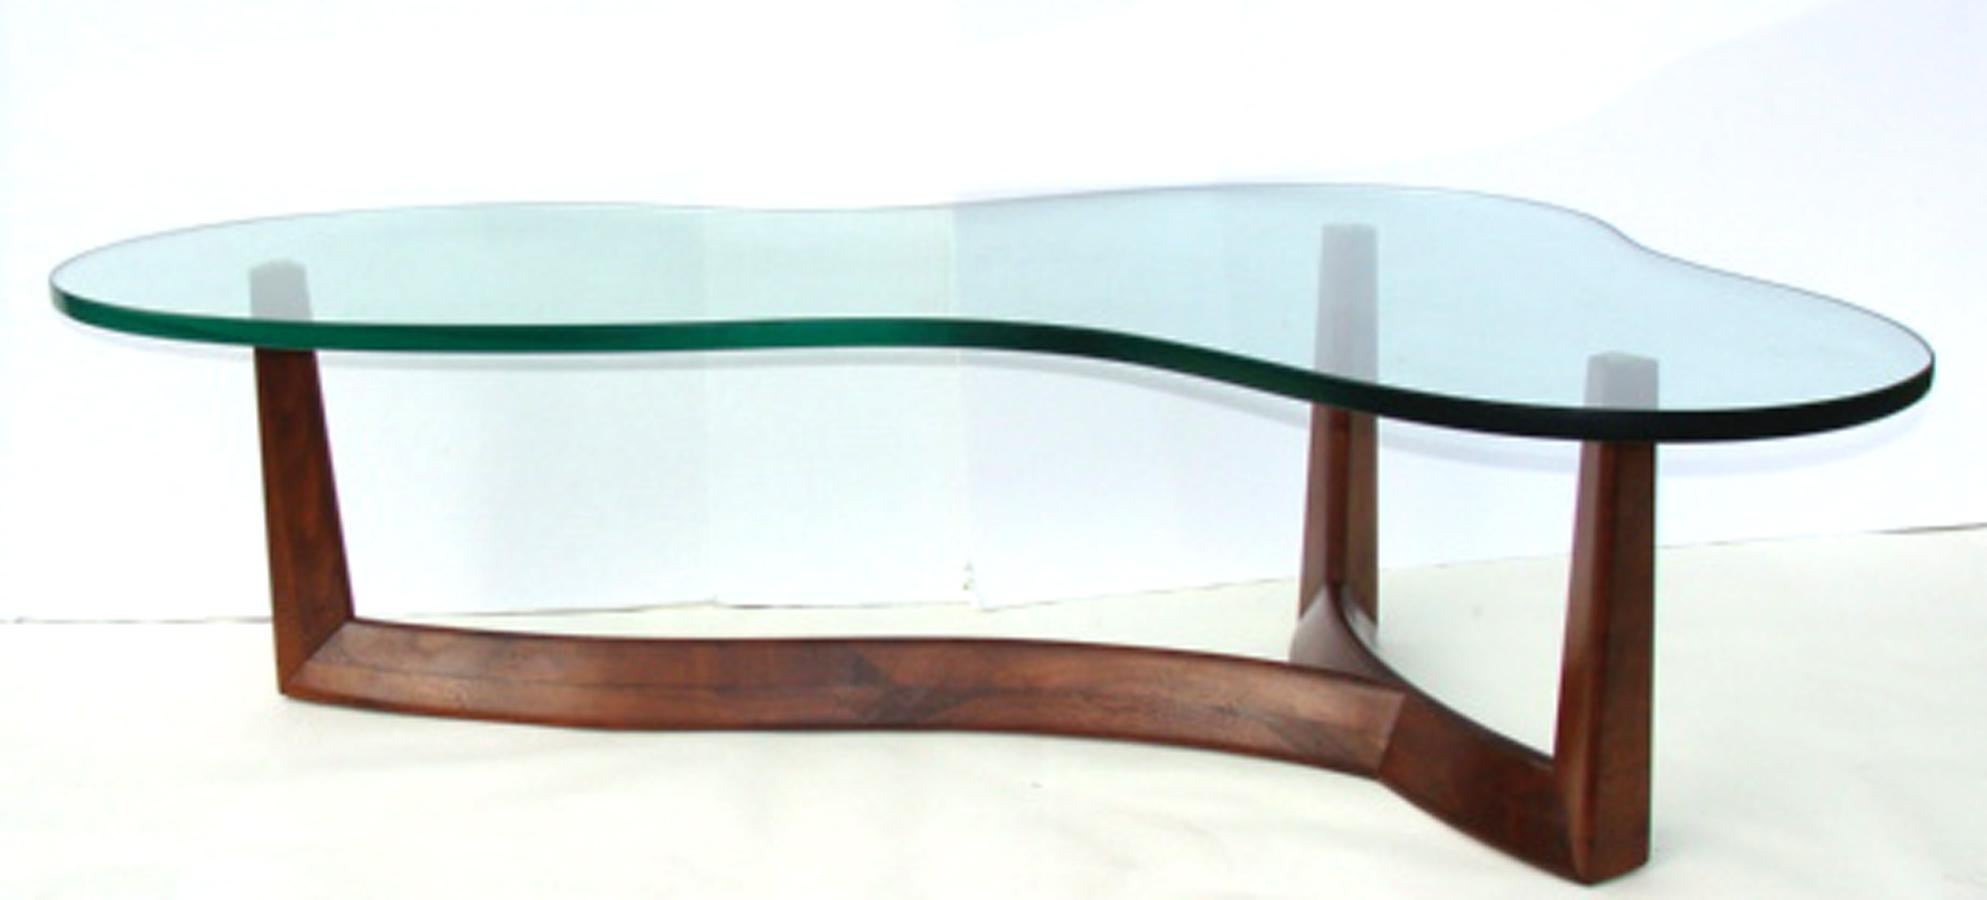 Newly discovered glass-top coffee table in the manner of Robsjohn- Gibbings.
Attributed to the John Widdicomb Co. (not Widdicomb Furniture). Although both firms were located in Grand Rapids, they were competing manufacturers. This table is likely